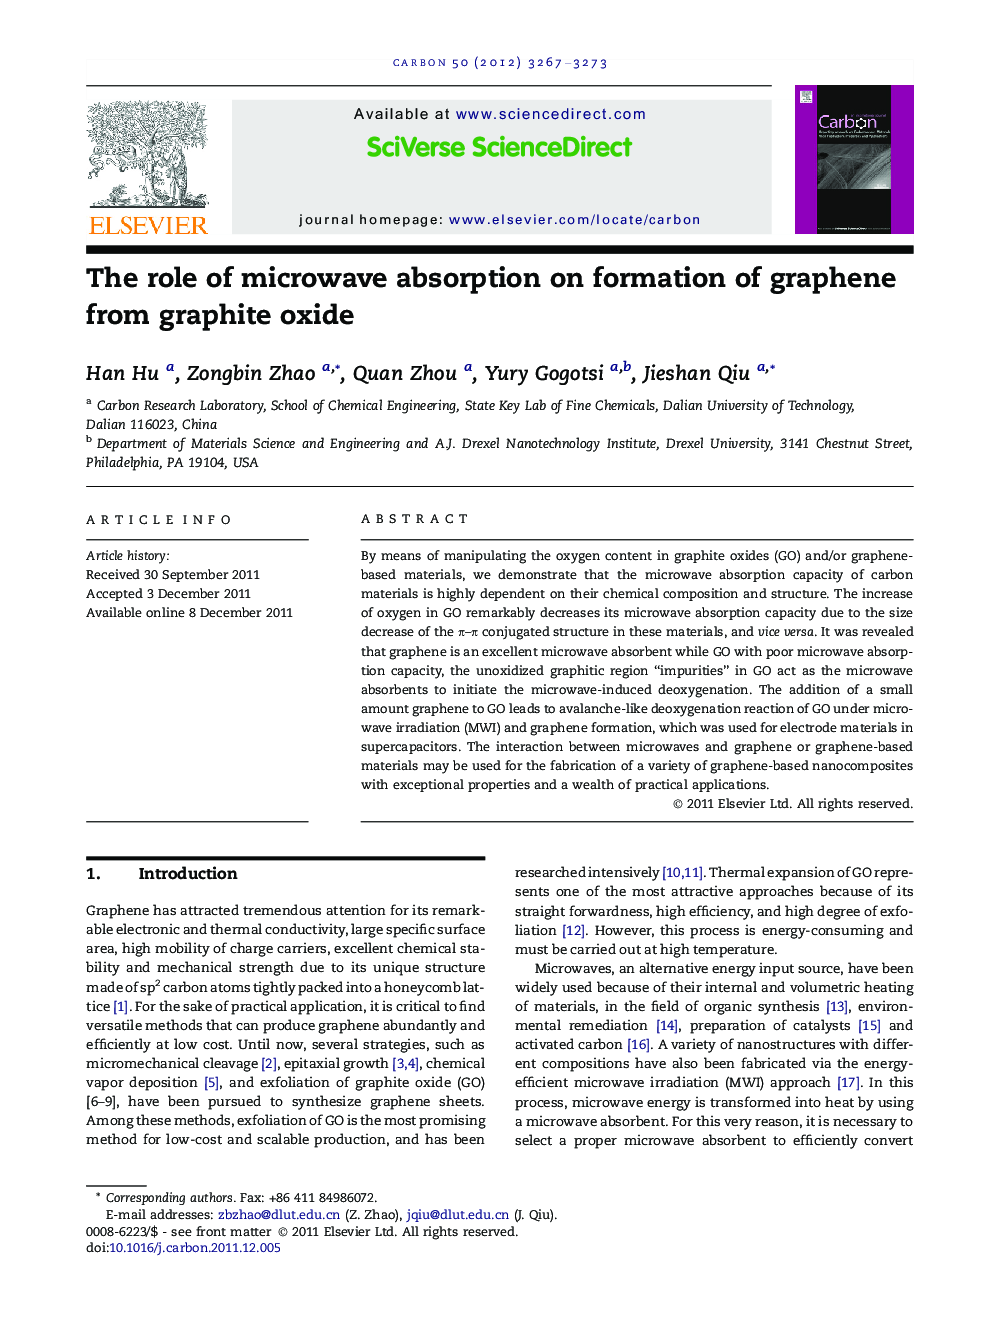 The role of microwave absorption on formation of graphene from graphite oxide